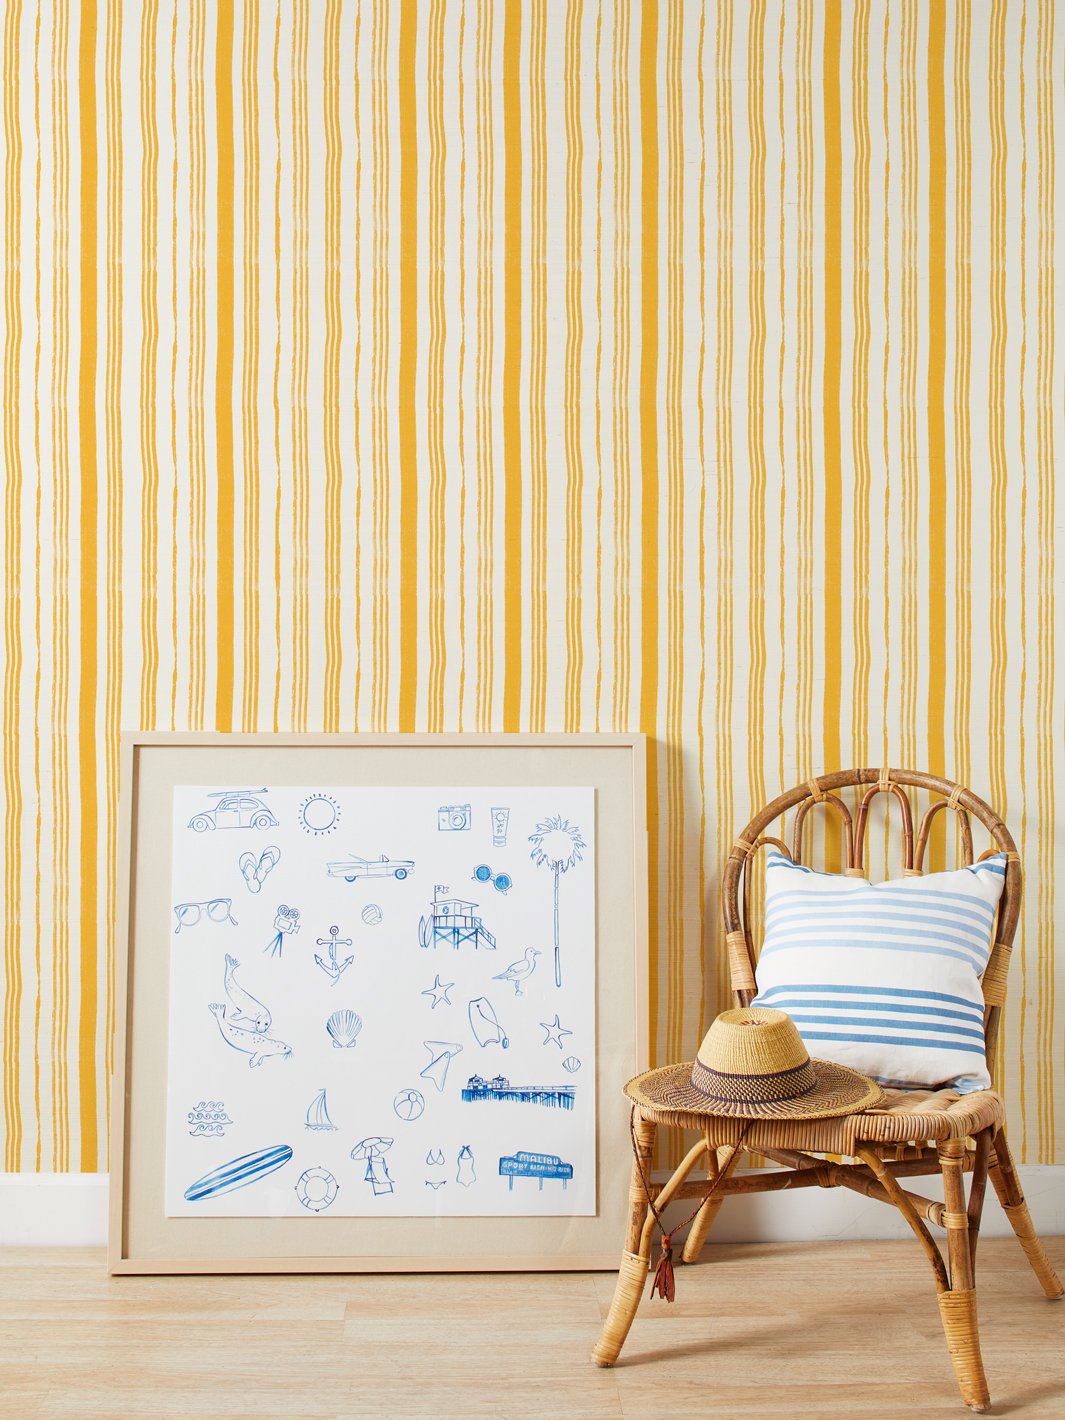 'Painted Stripes' Grasscloth' Wallpaper by Nathan Turner - Gold